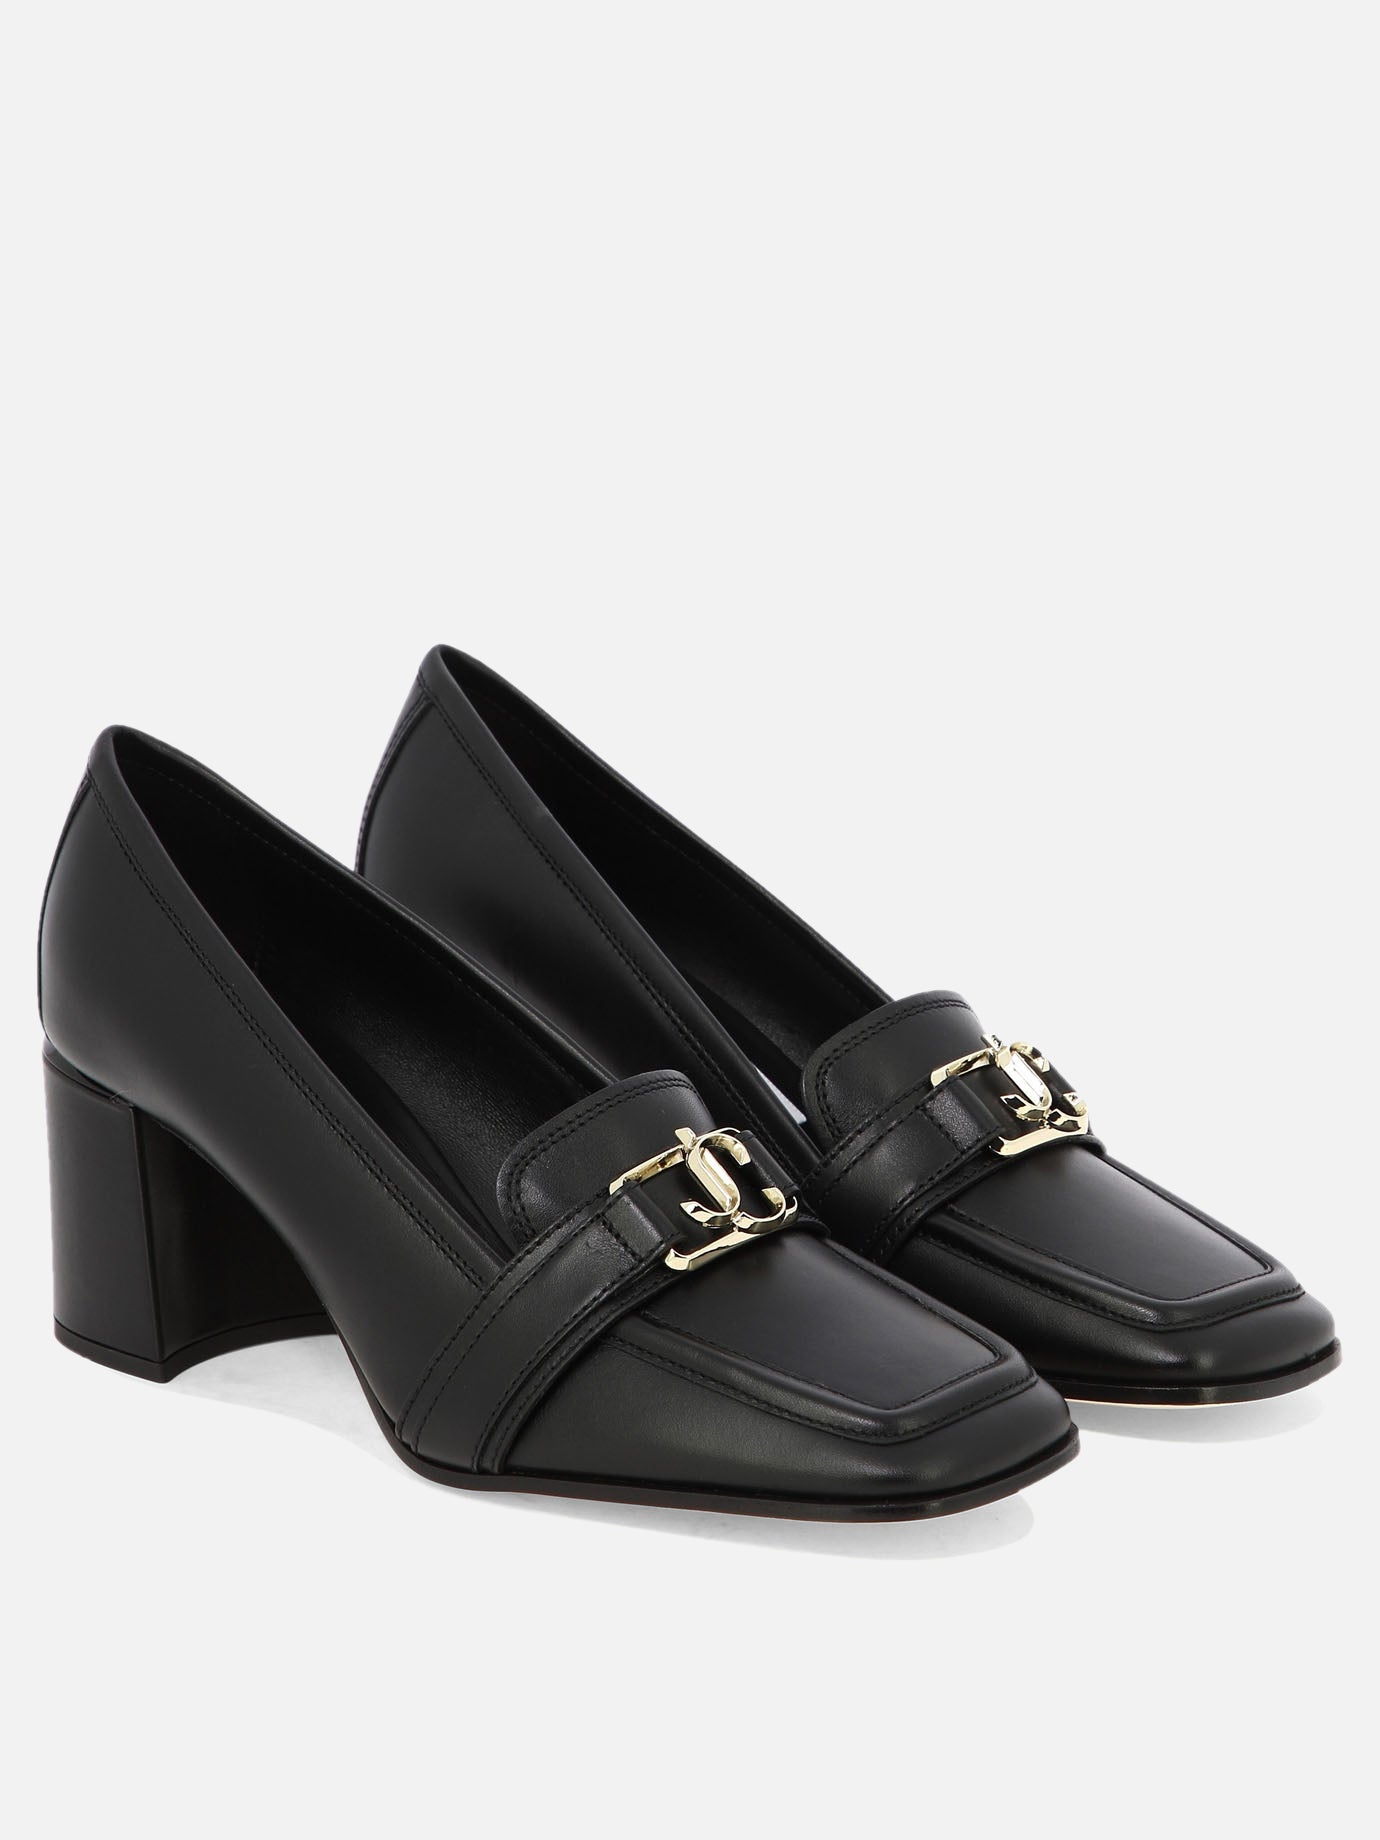 "Evin 65" heeled loafers